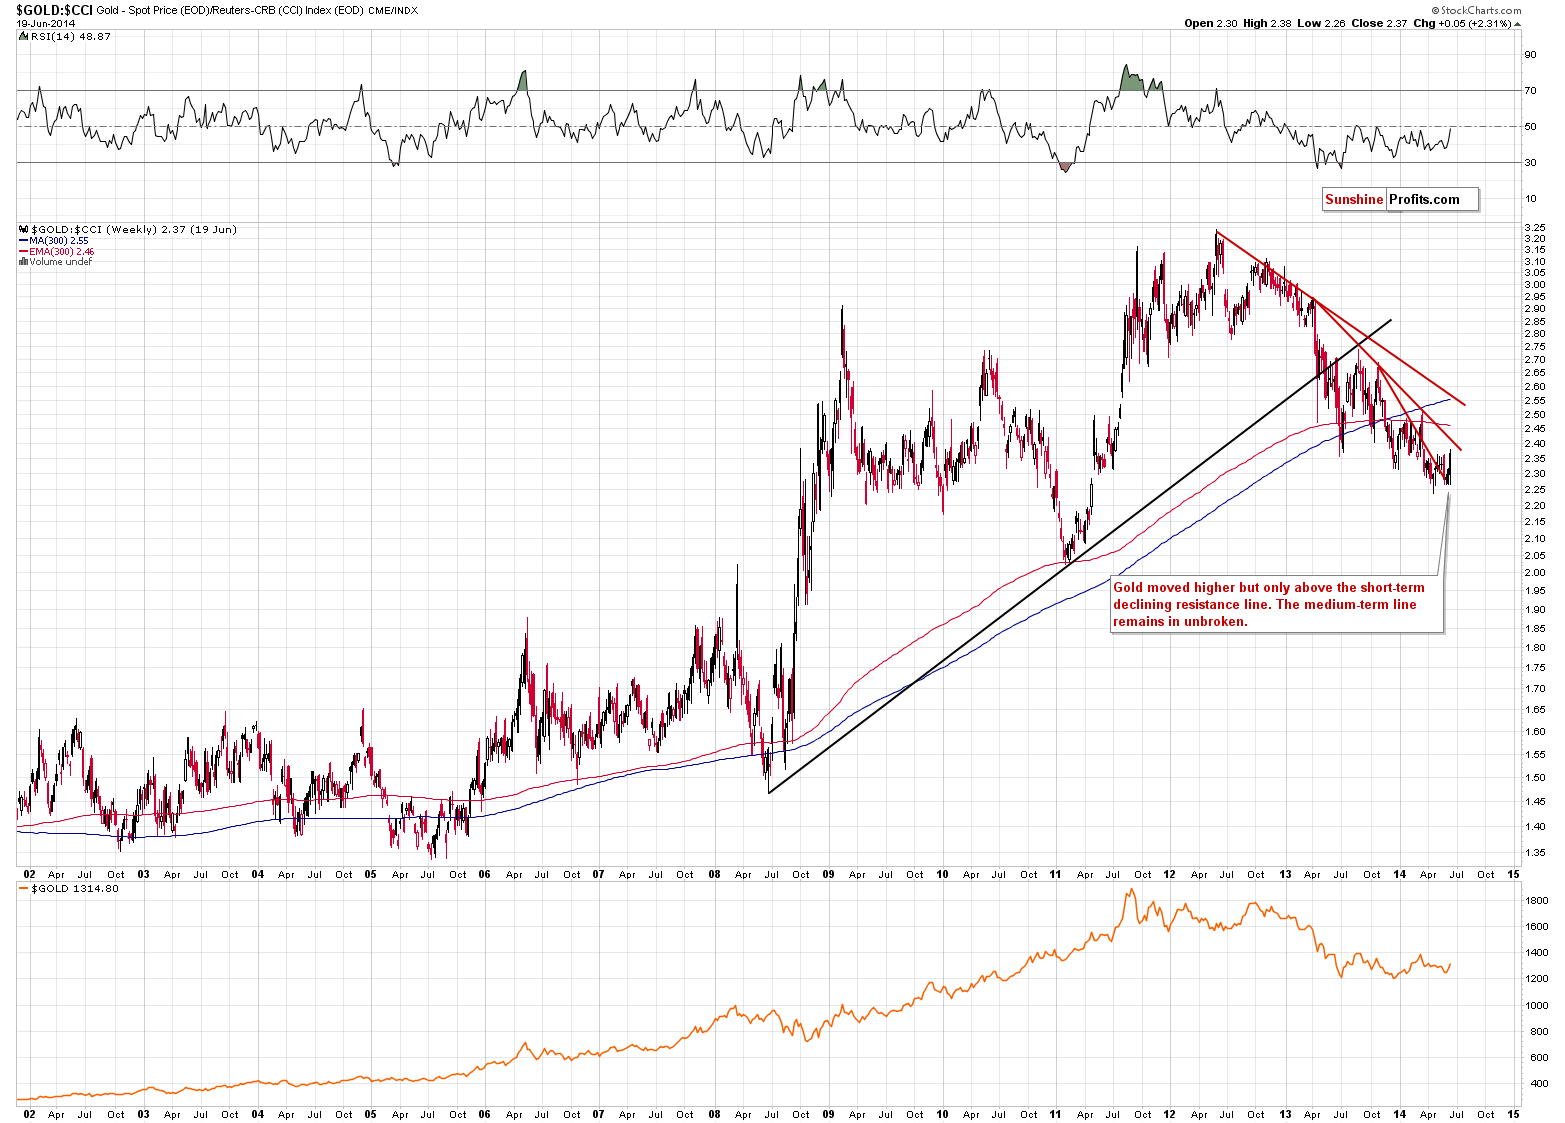 GOLD:CCI - gold to CCI ratio